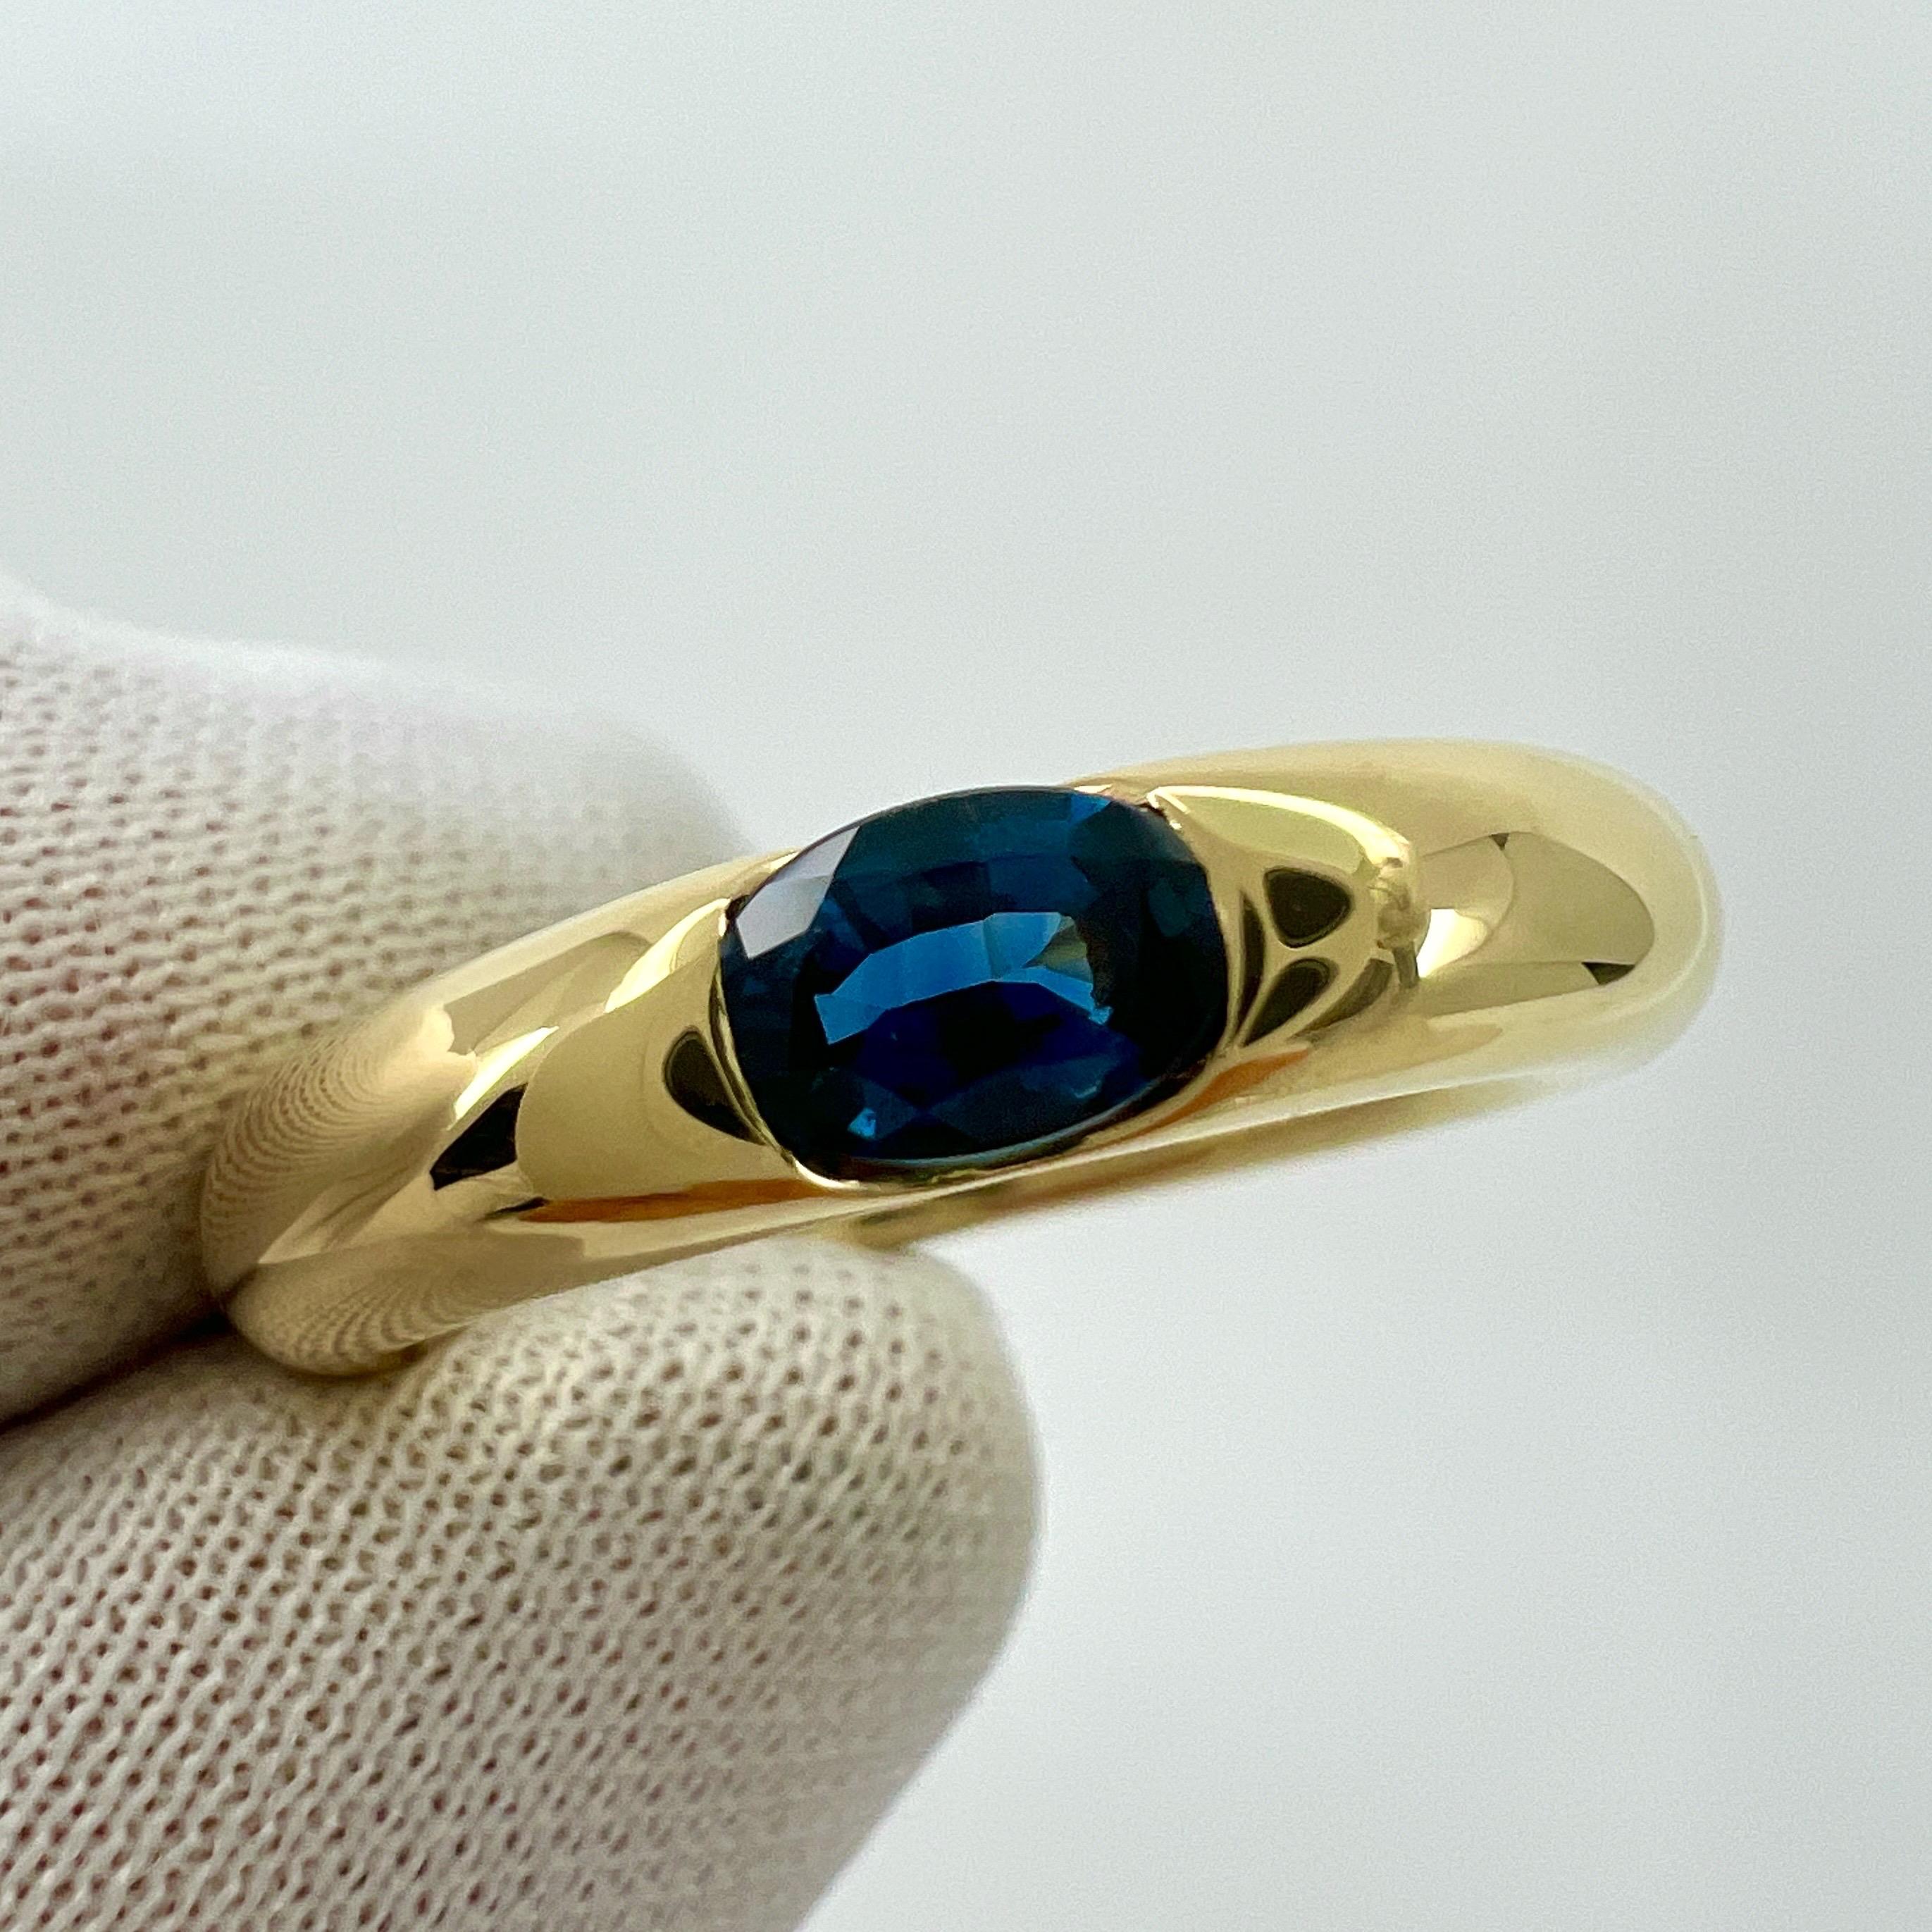 Vintage Cartier Blue Sapphire Oval Ellipse 18k Yellow Gold Solitaire Ring US5 49 For Sale 1